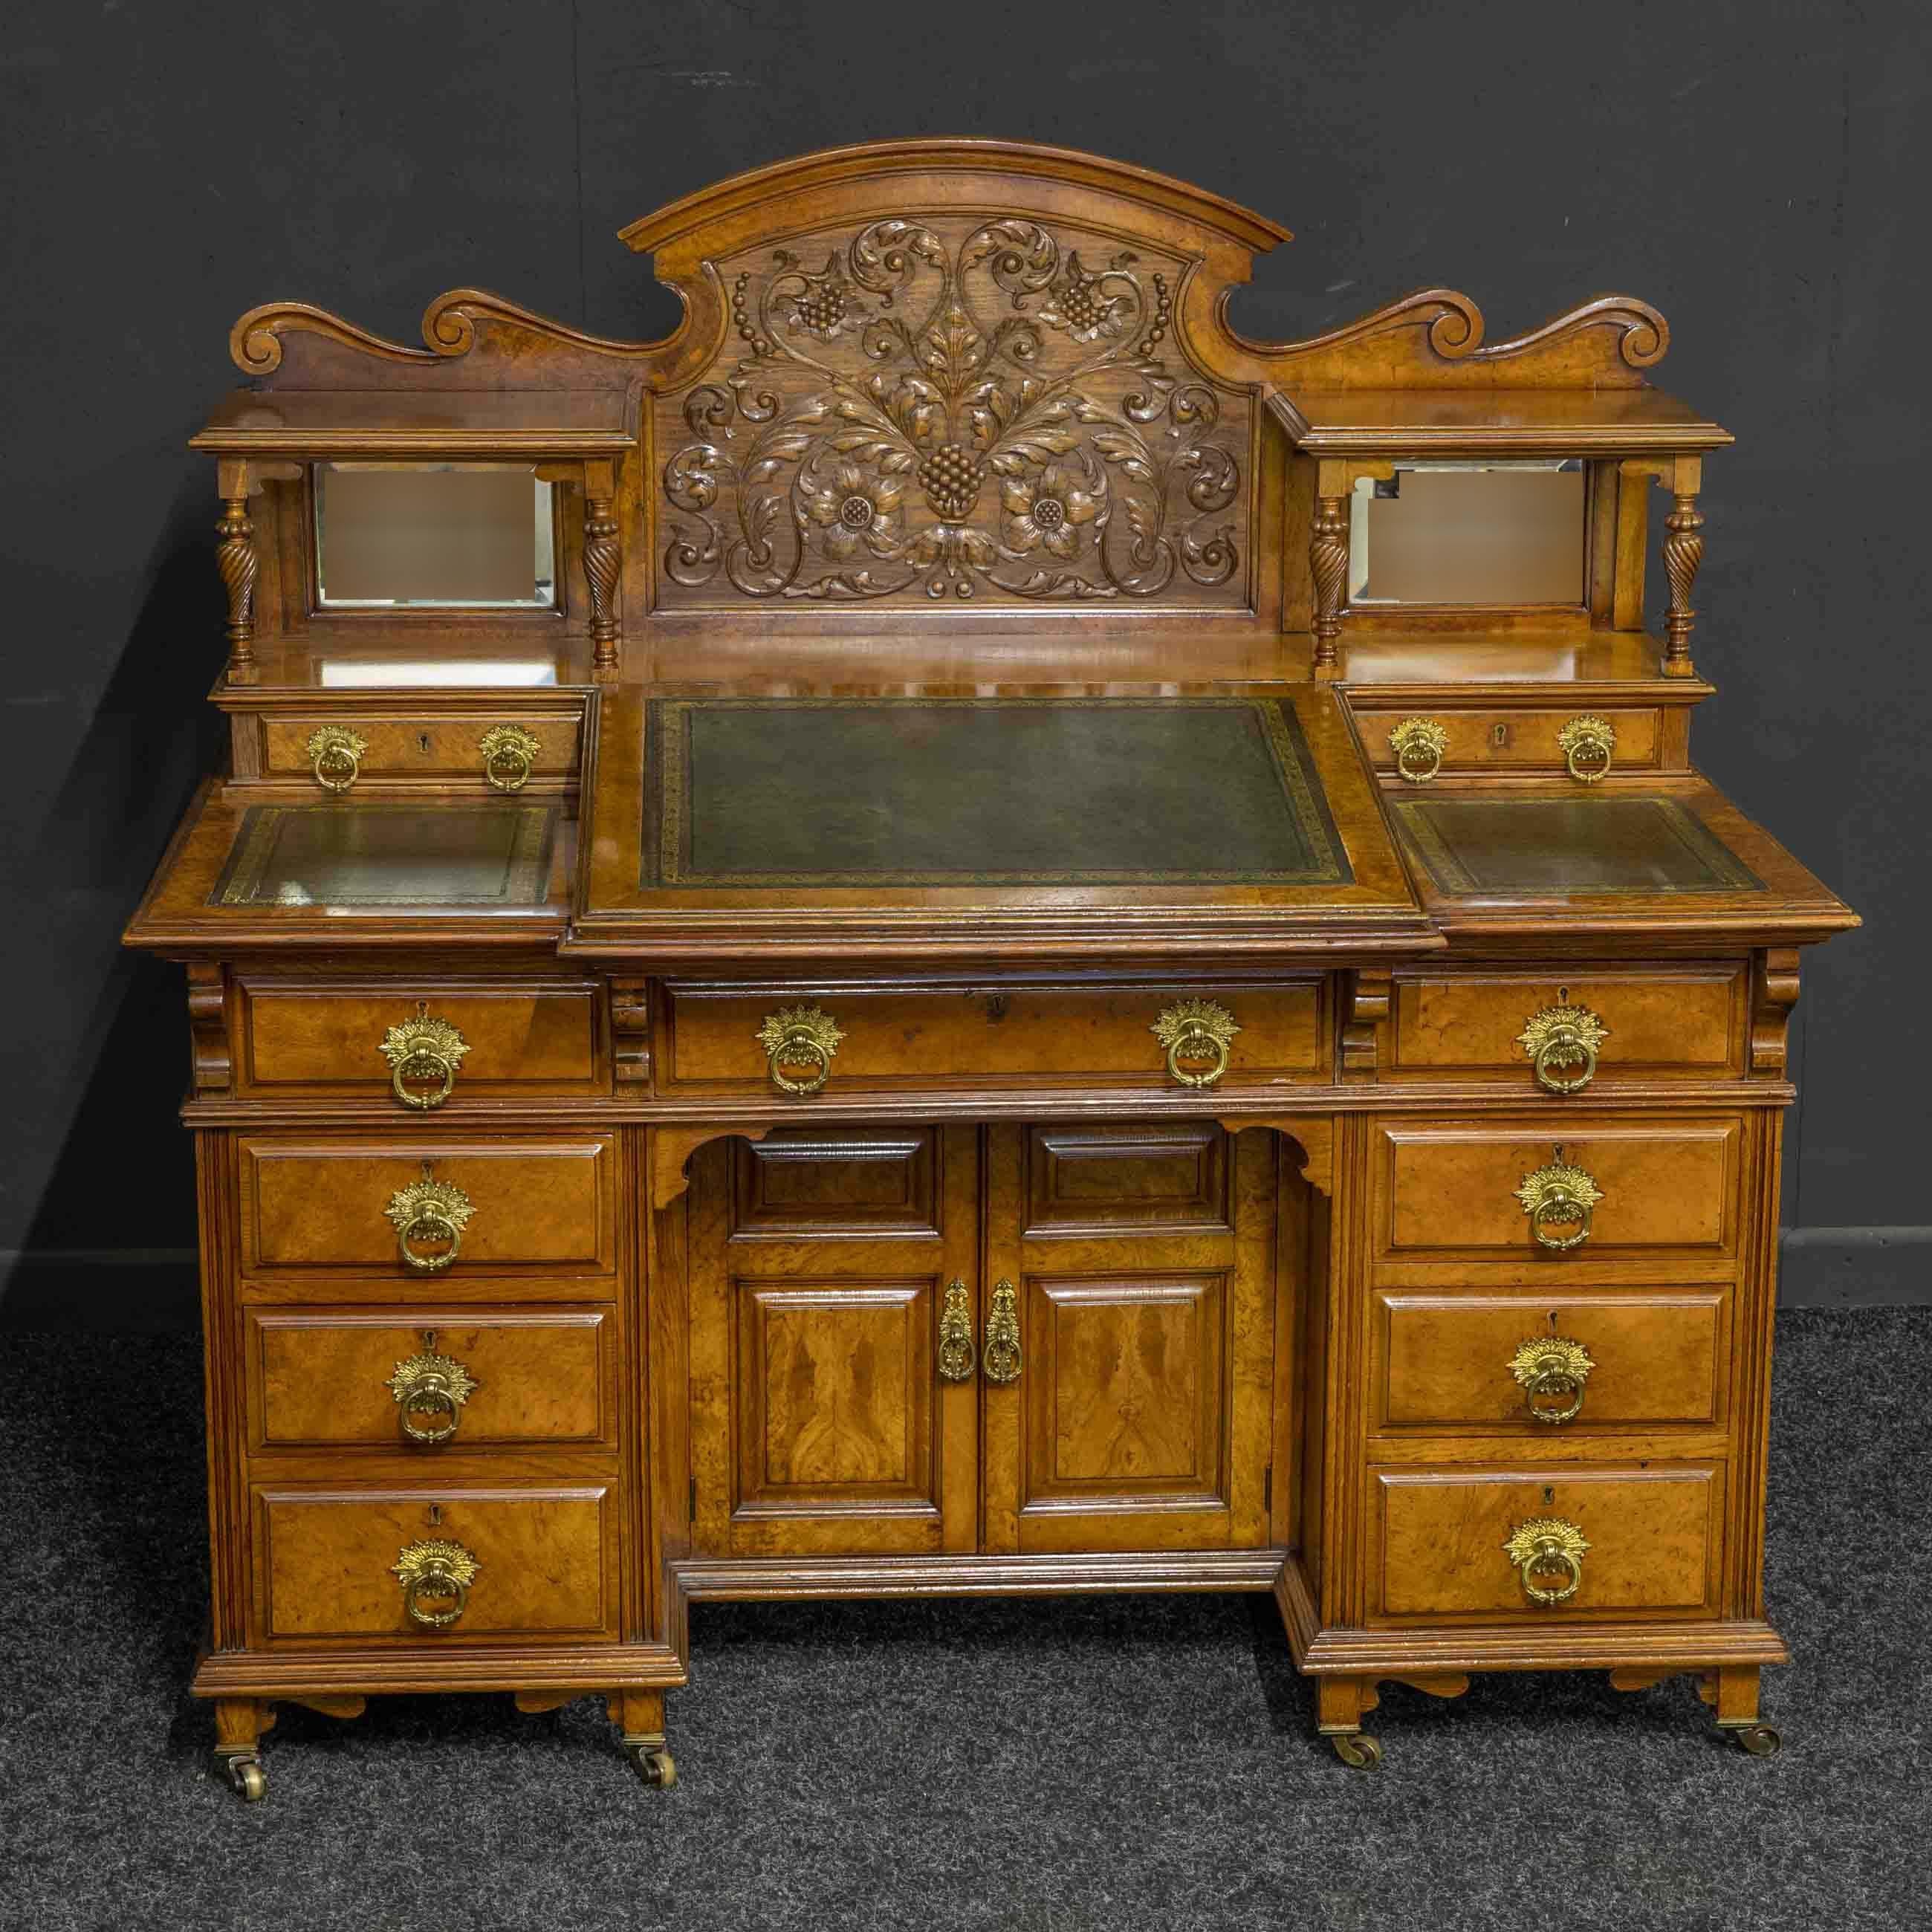 A magnificent late Victorian desk by the acclaimed cabinet makers Thomas Turner of Manchester, England. Highly unusual in design and most probably a one off special commission. Made from solid oak with pollard oak veneers to the more exposed areas,